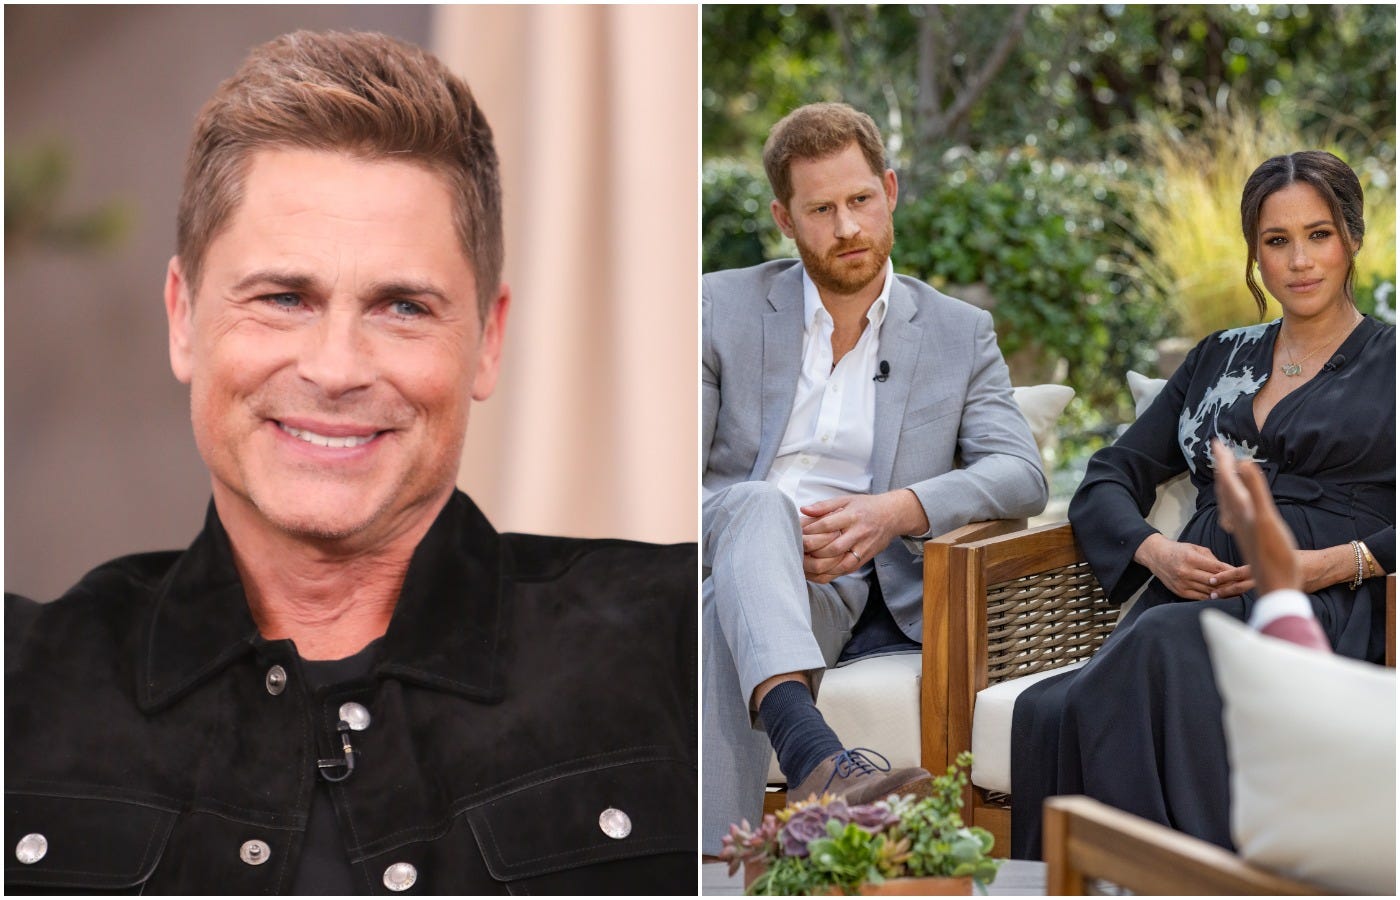 Rob Lowe at Universal Studios/ Meghan Markle and Prince Harry during a CBS sit-down interview with Oprah Winfrey.